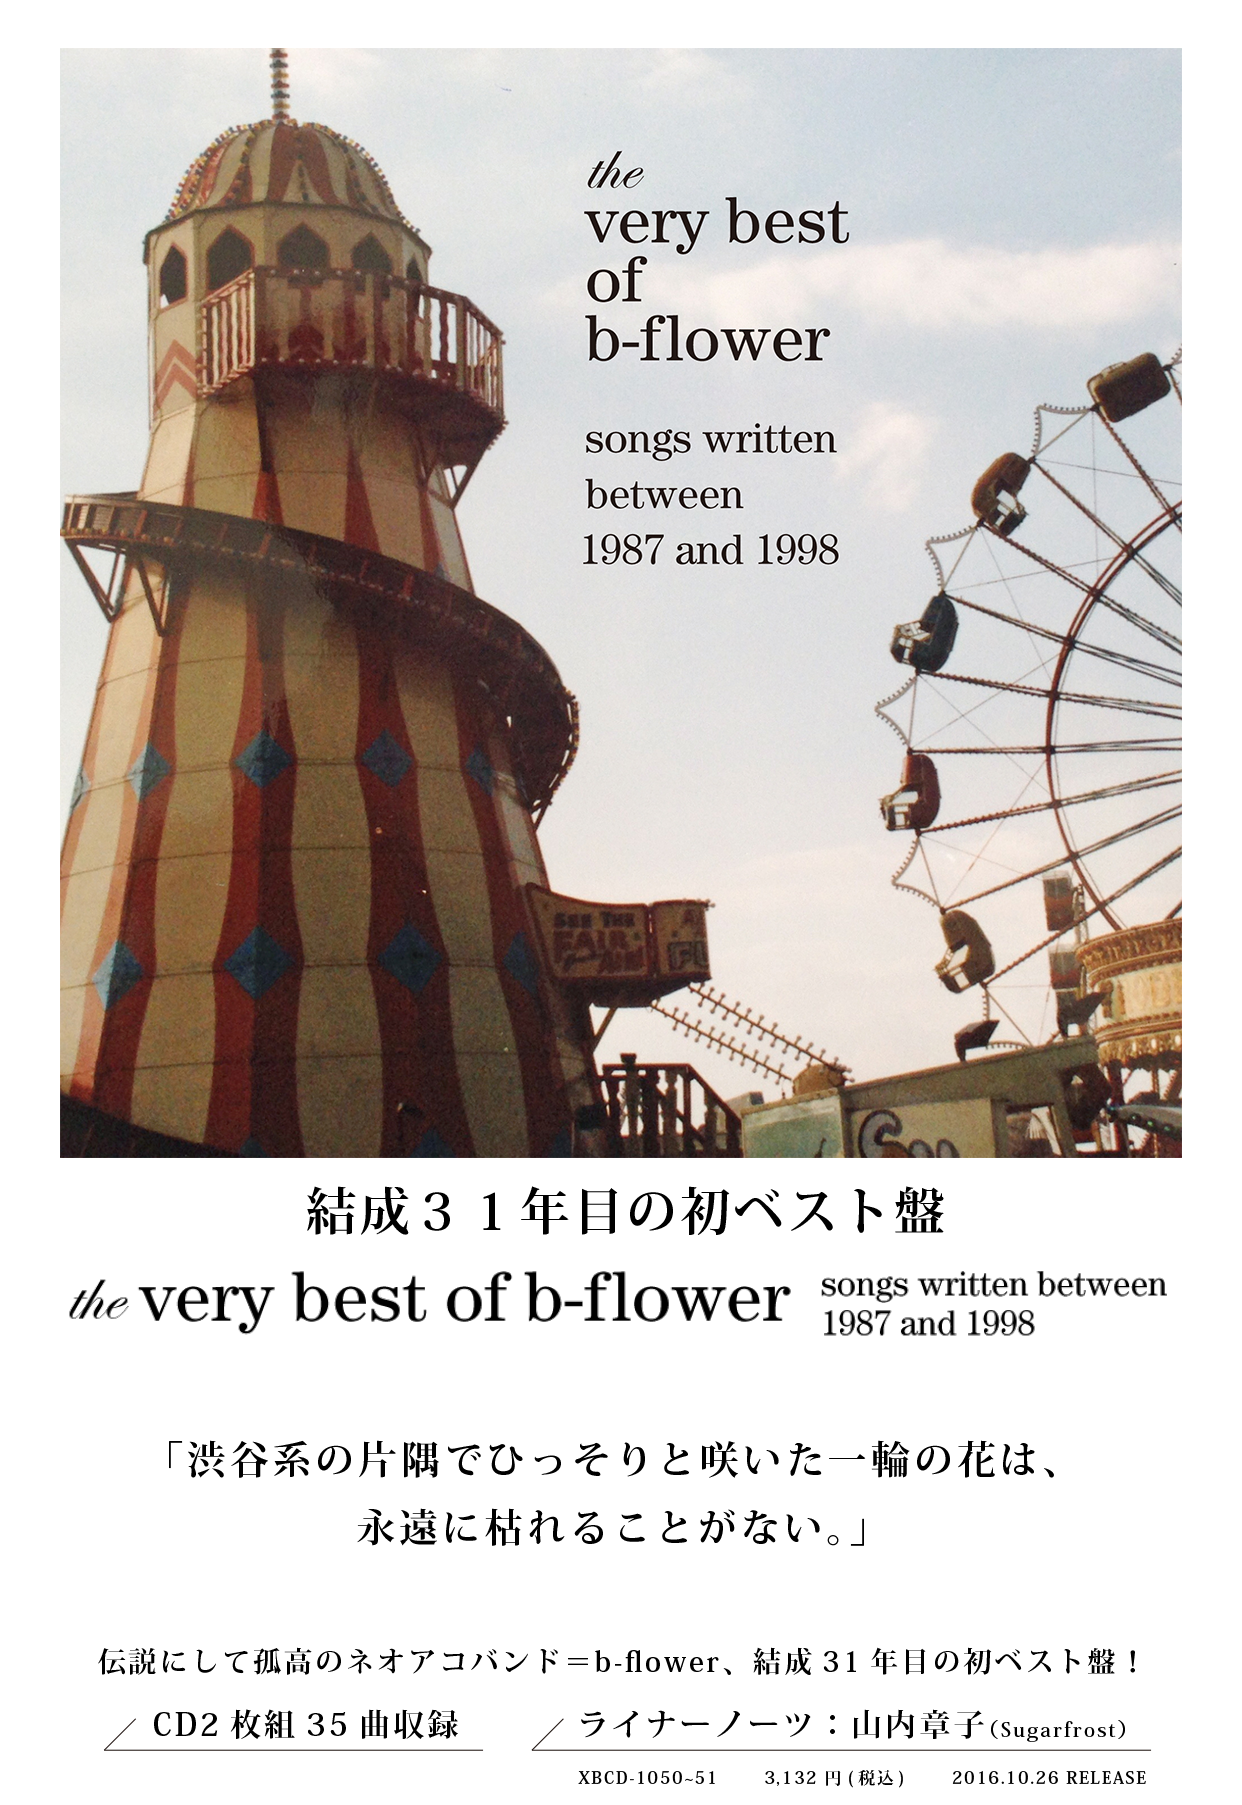 the very best of b-flower songs written between 1987 and 1998